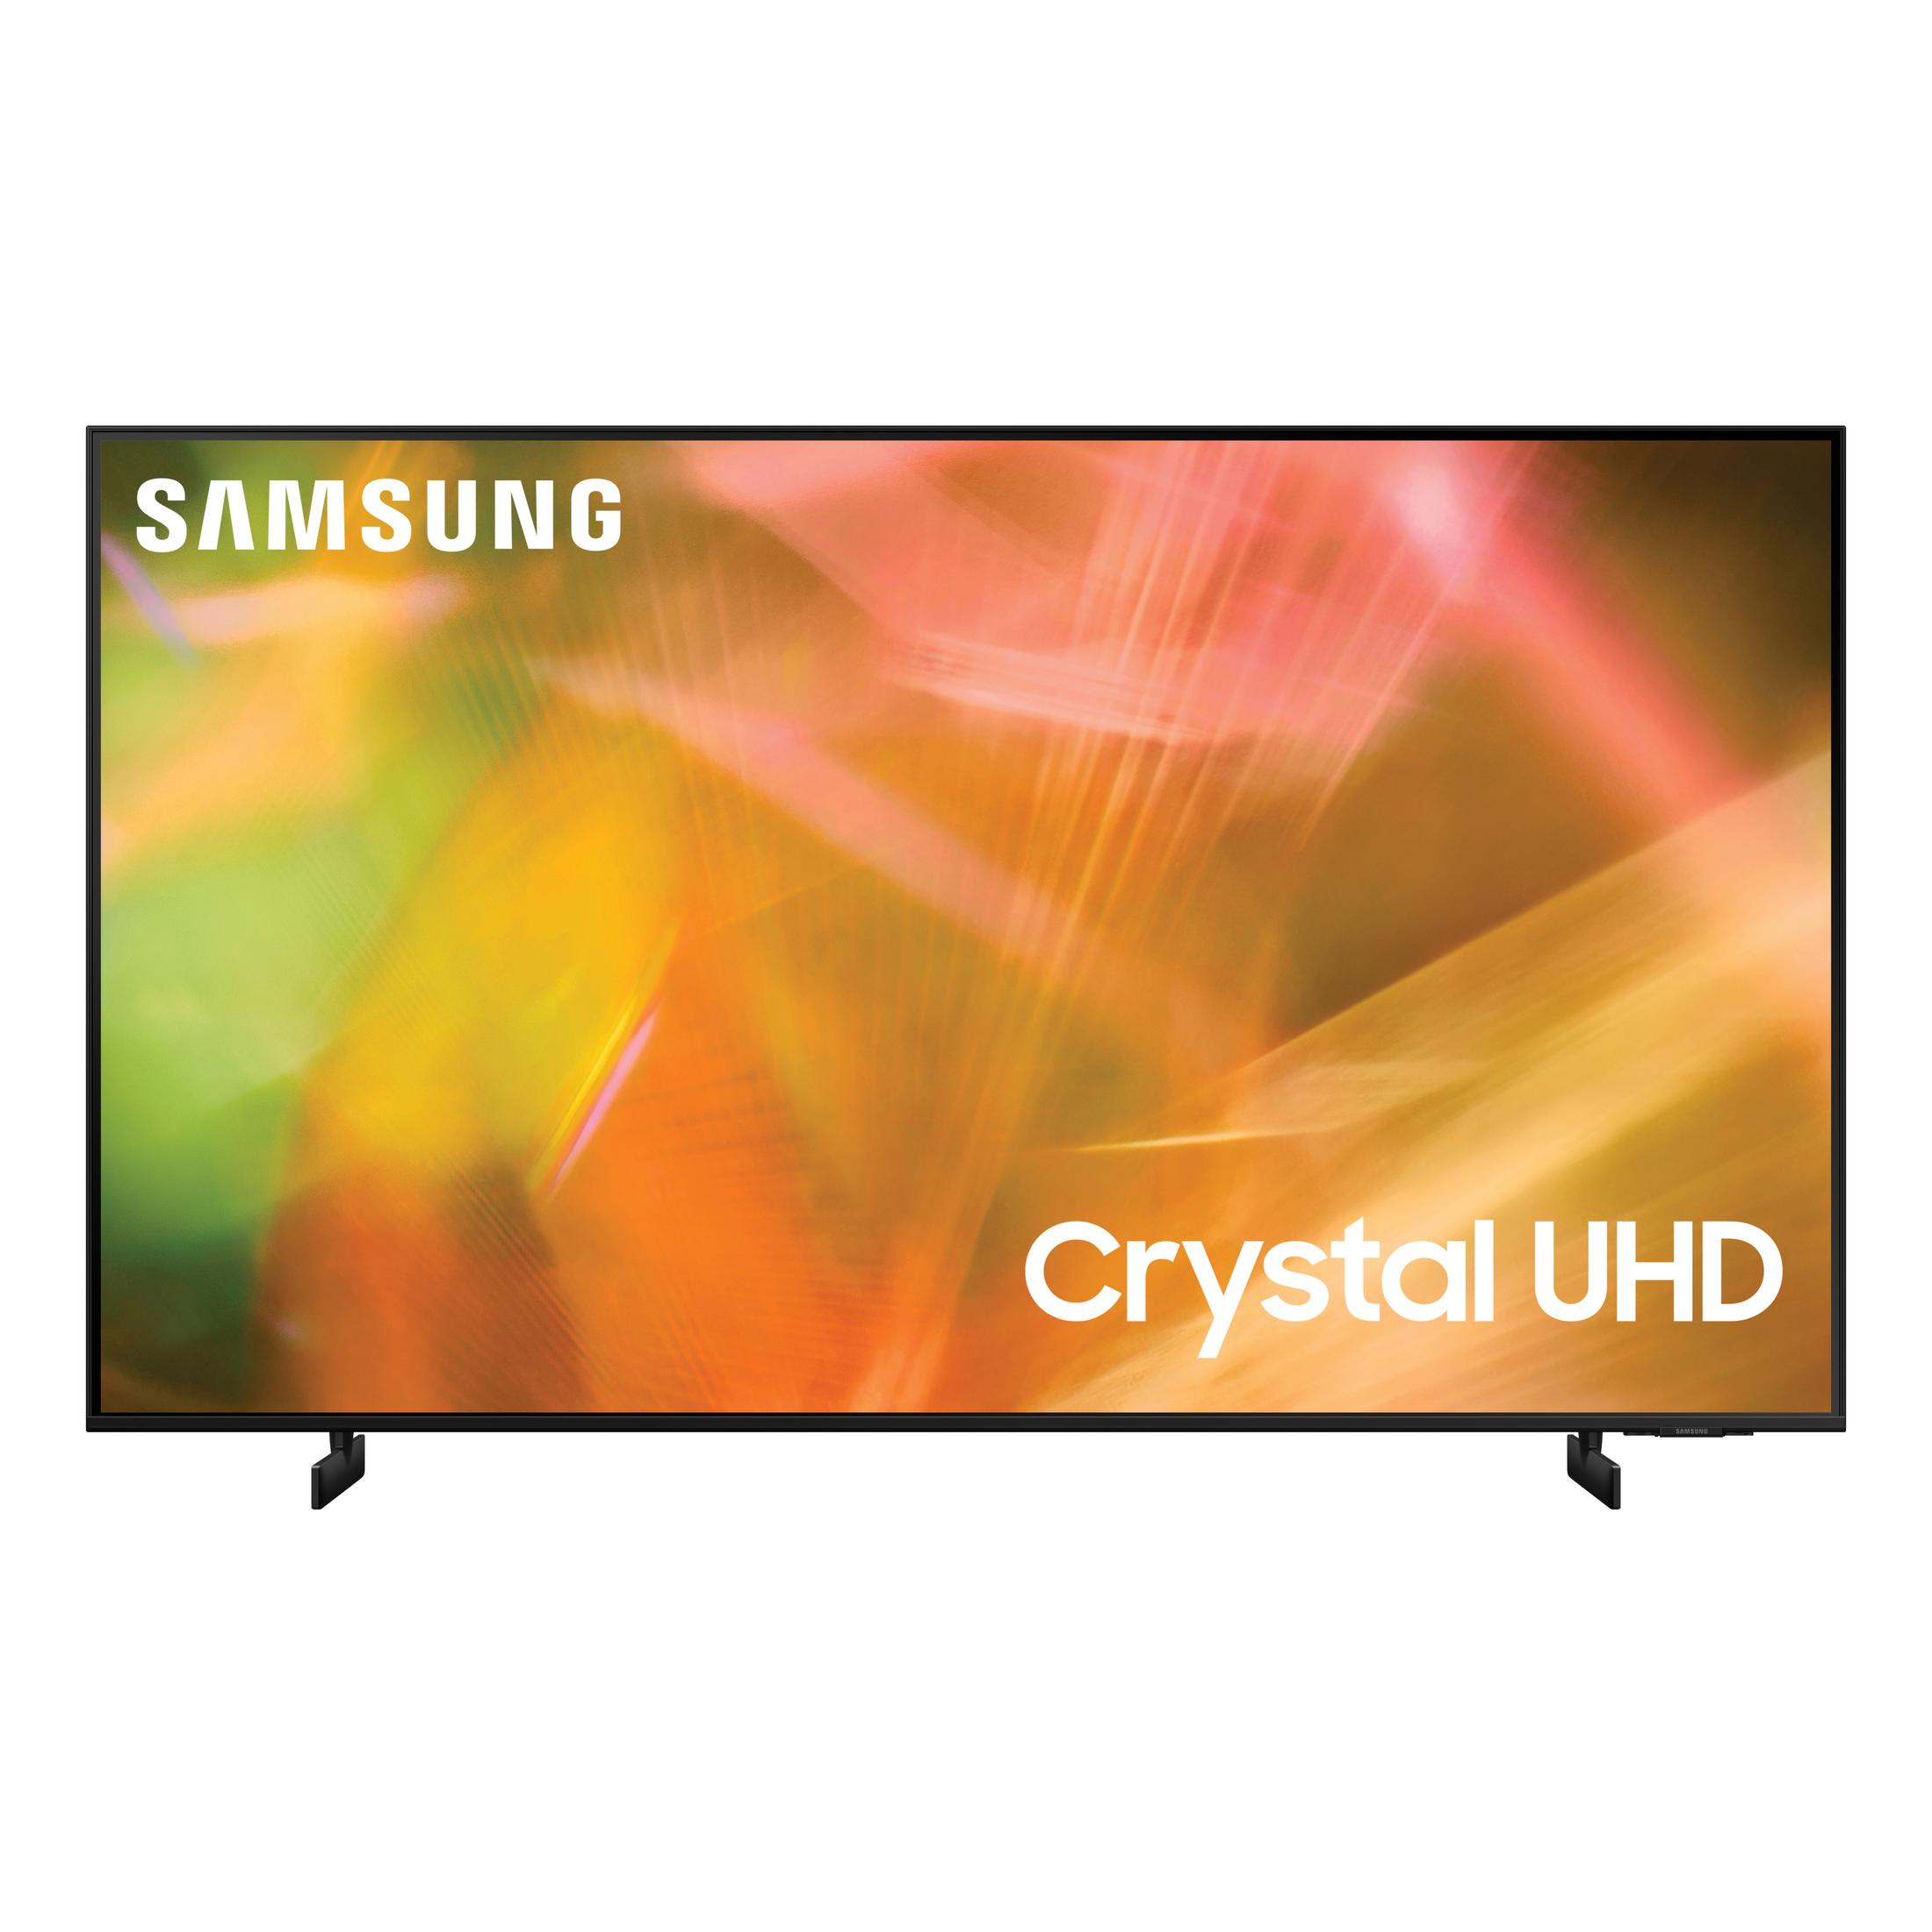 SAMSUNG 75" Class 4K Crystal UHD (2160P) LED Smart TV with HDR UN75AU8000B - image 1 of 11